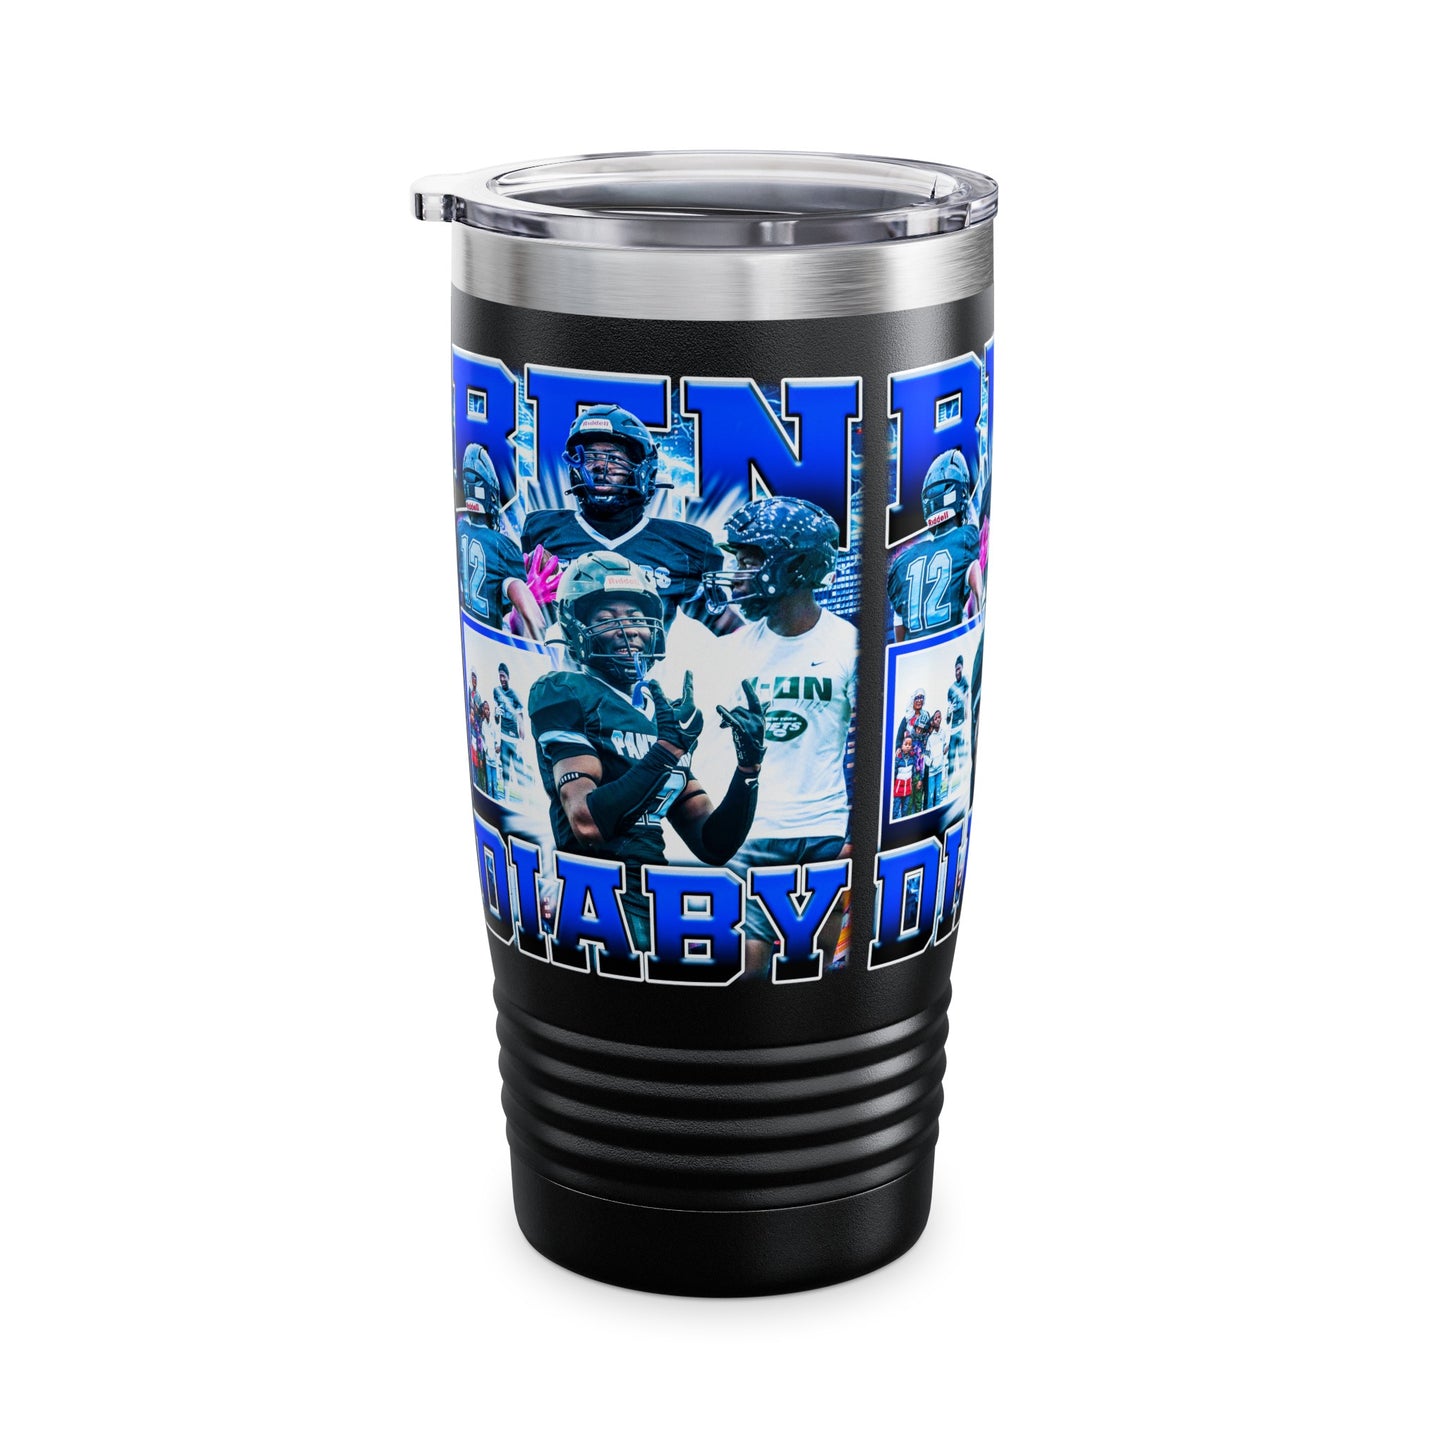 Ben Diaby Stainless Steal Tumbler